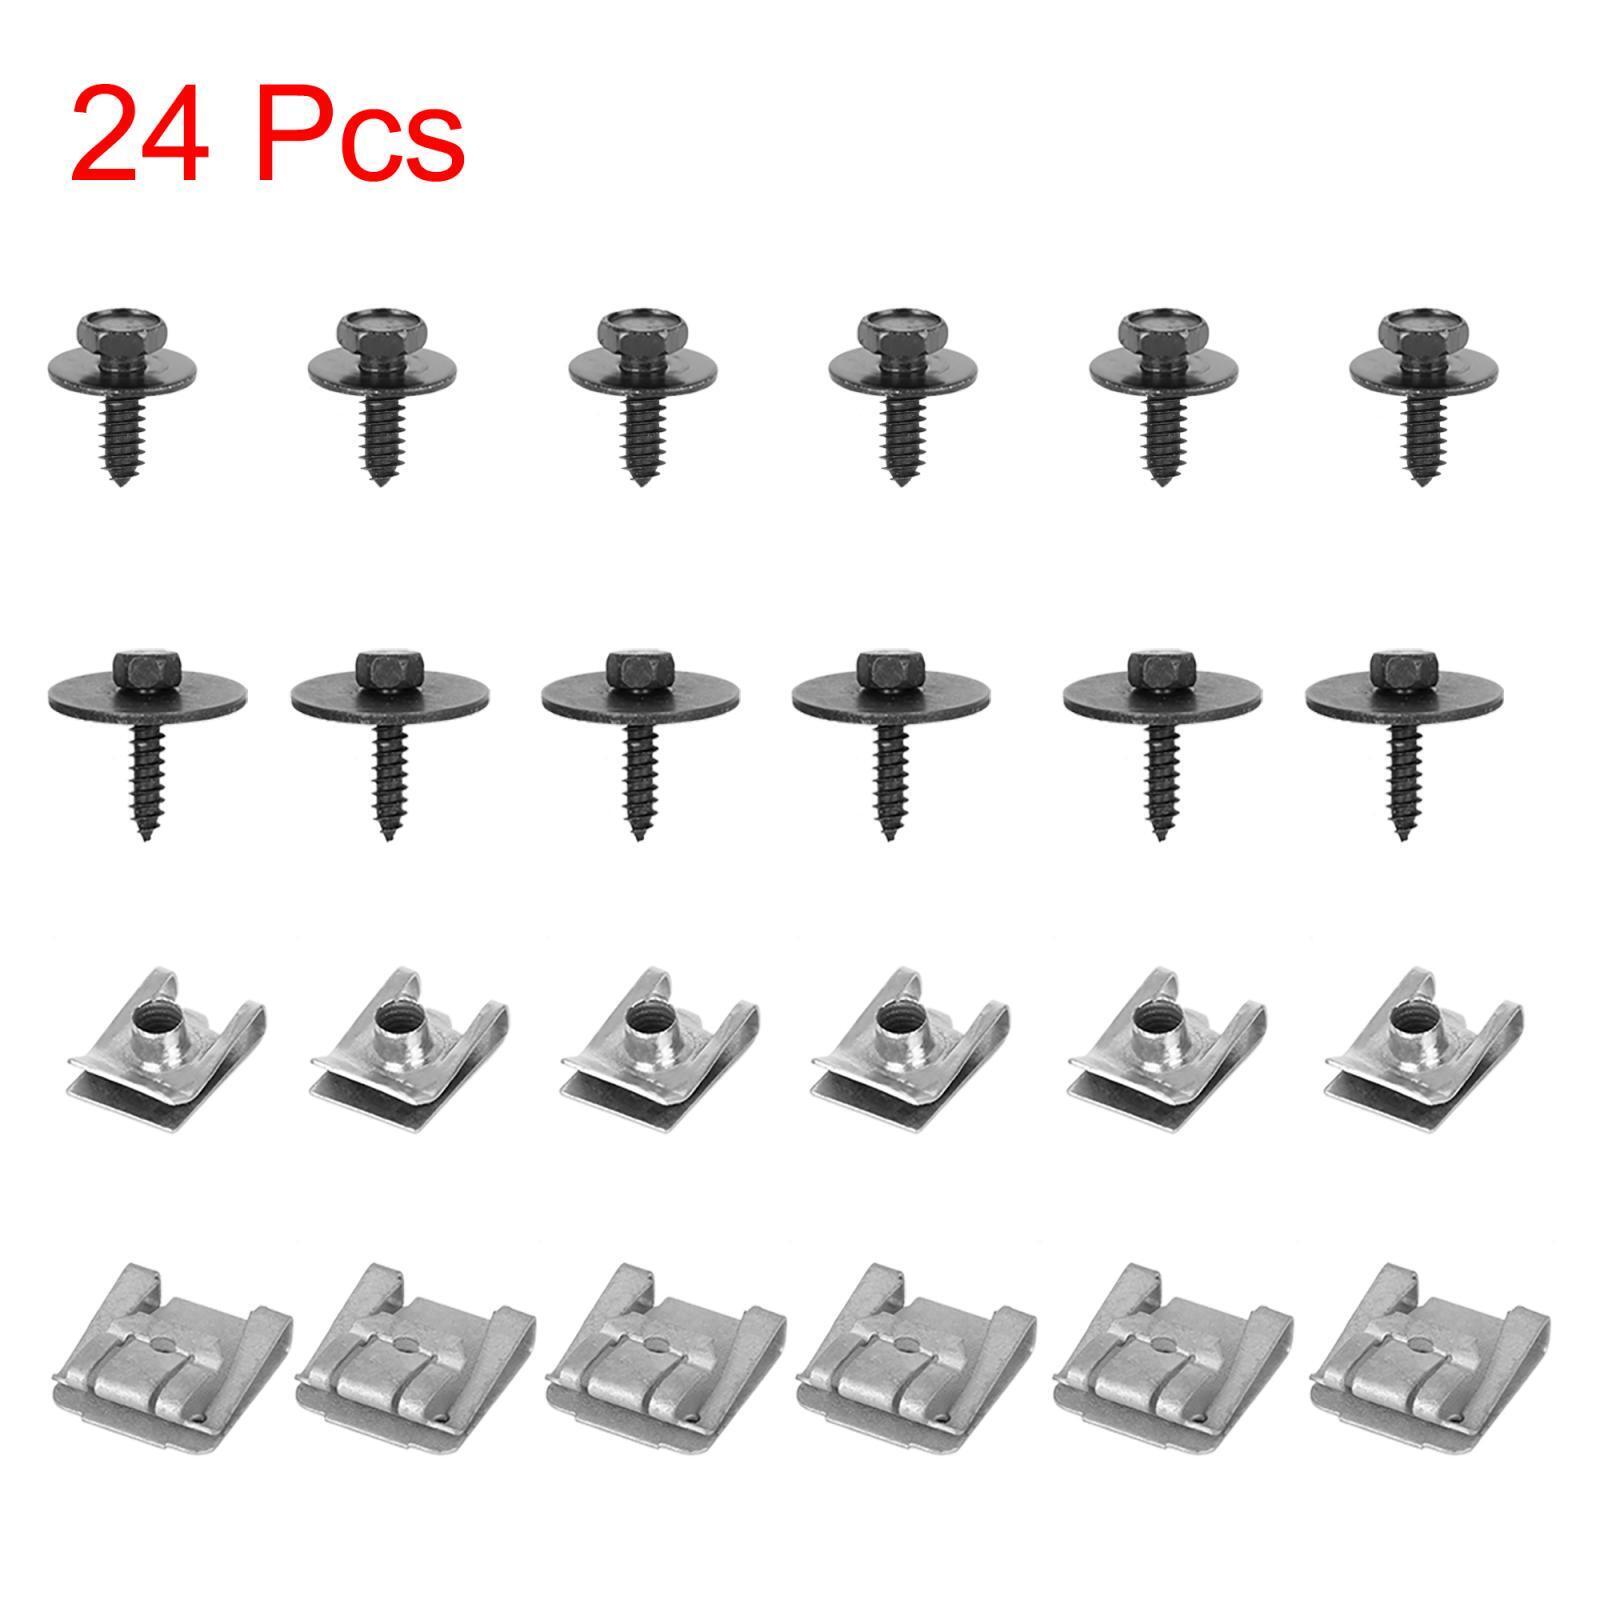 24pcs Engine Undertray Clips Screws Under Cover Rivets for Mercedes-Benz E-Class